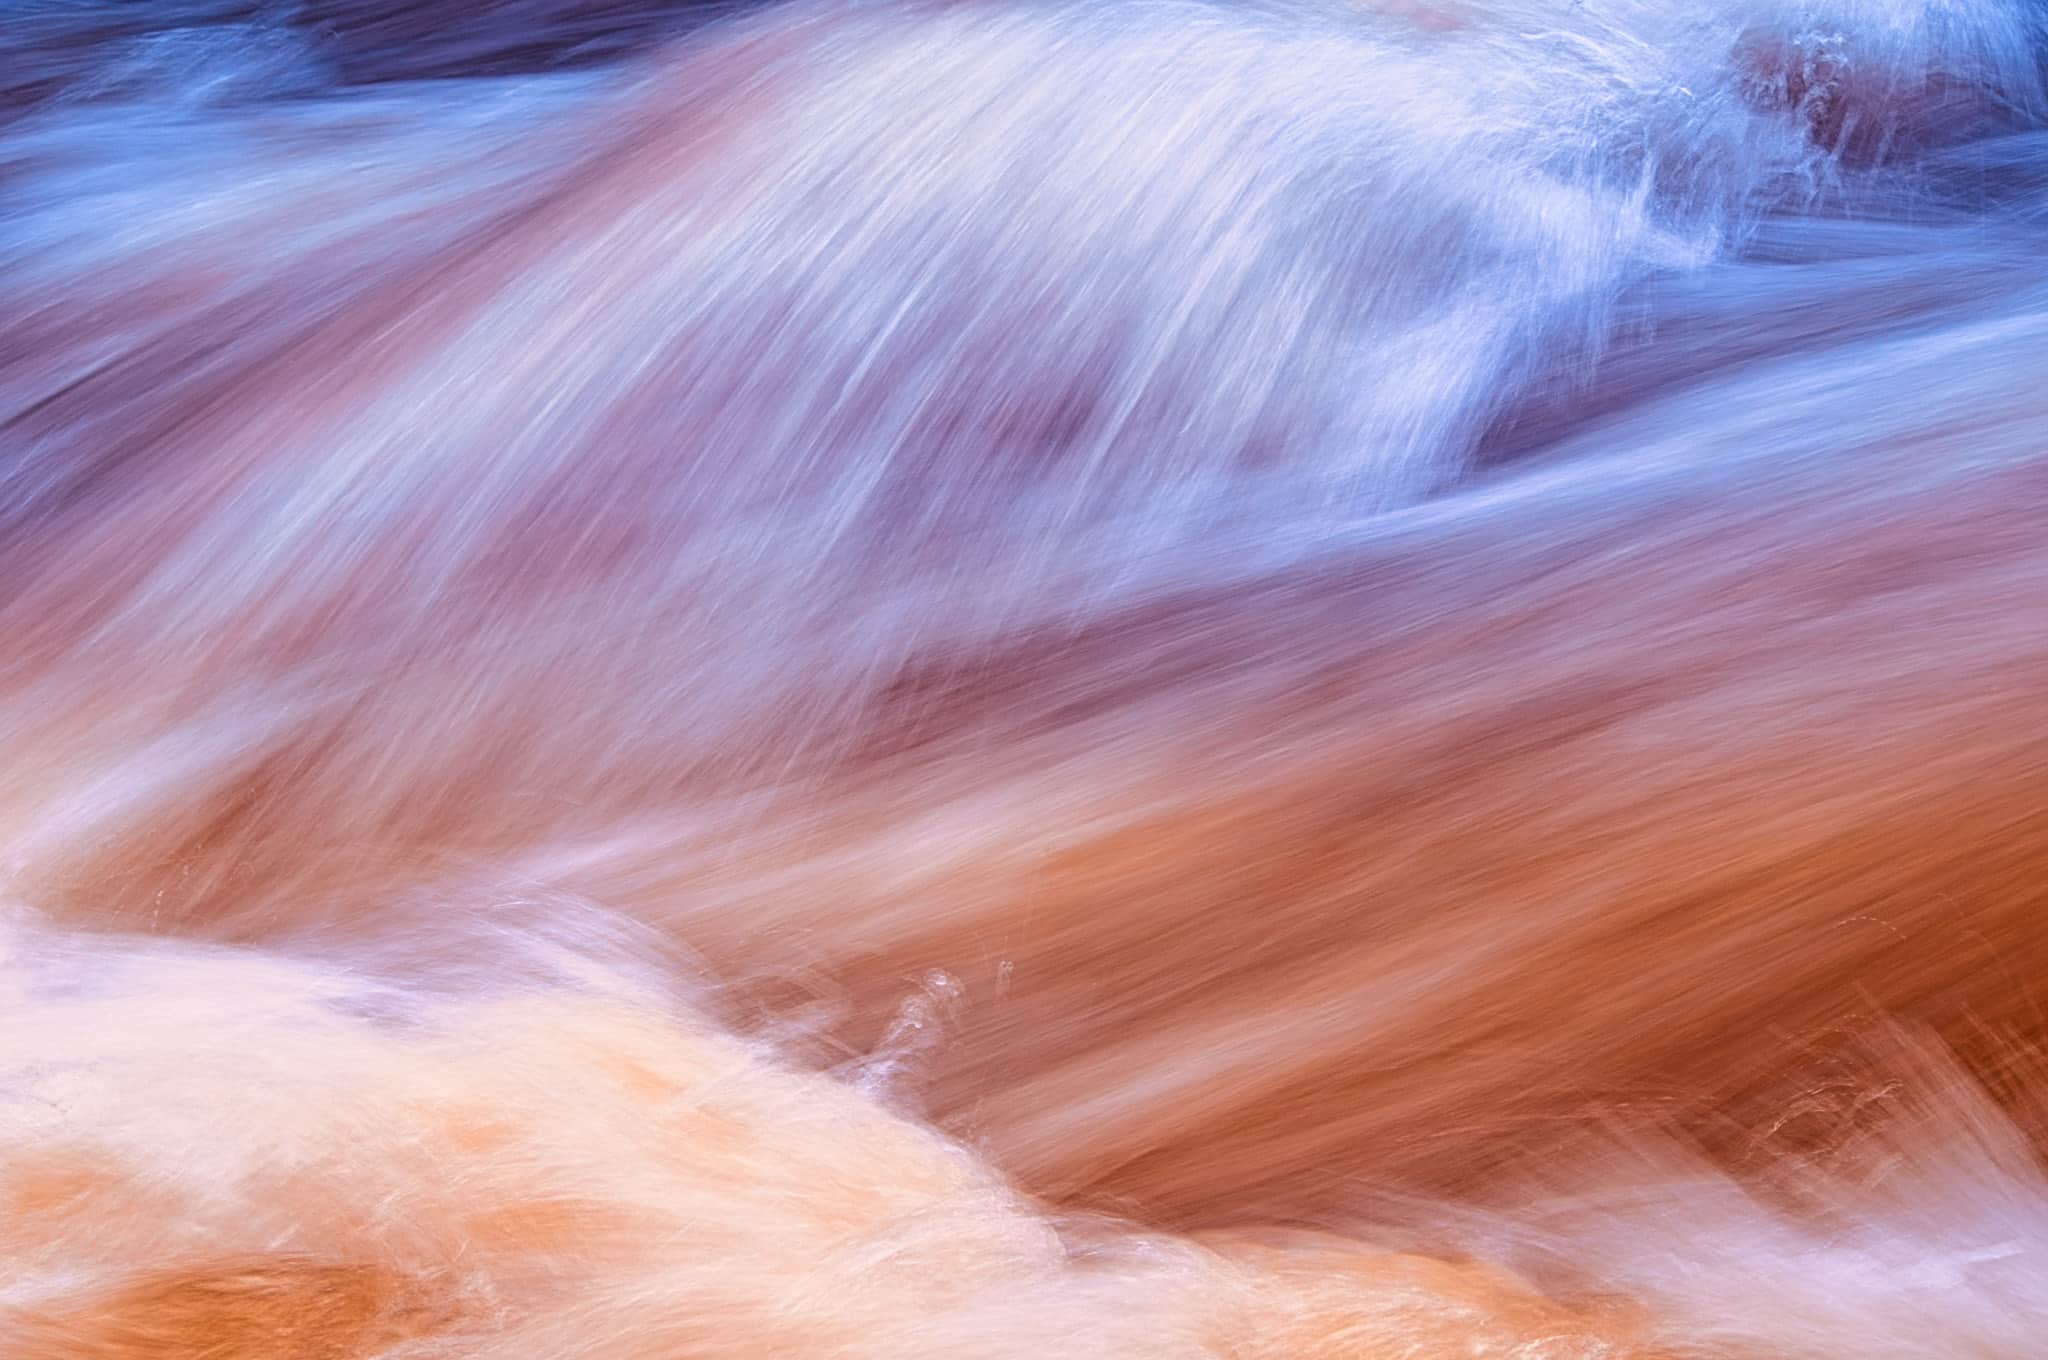 Summer rains cause Boulder Creek to flow swiftly, This is a long exposure closeup of the flowing water.